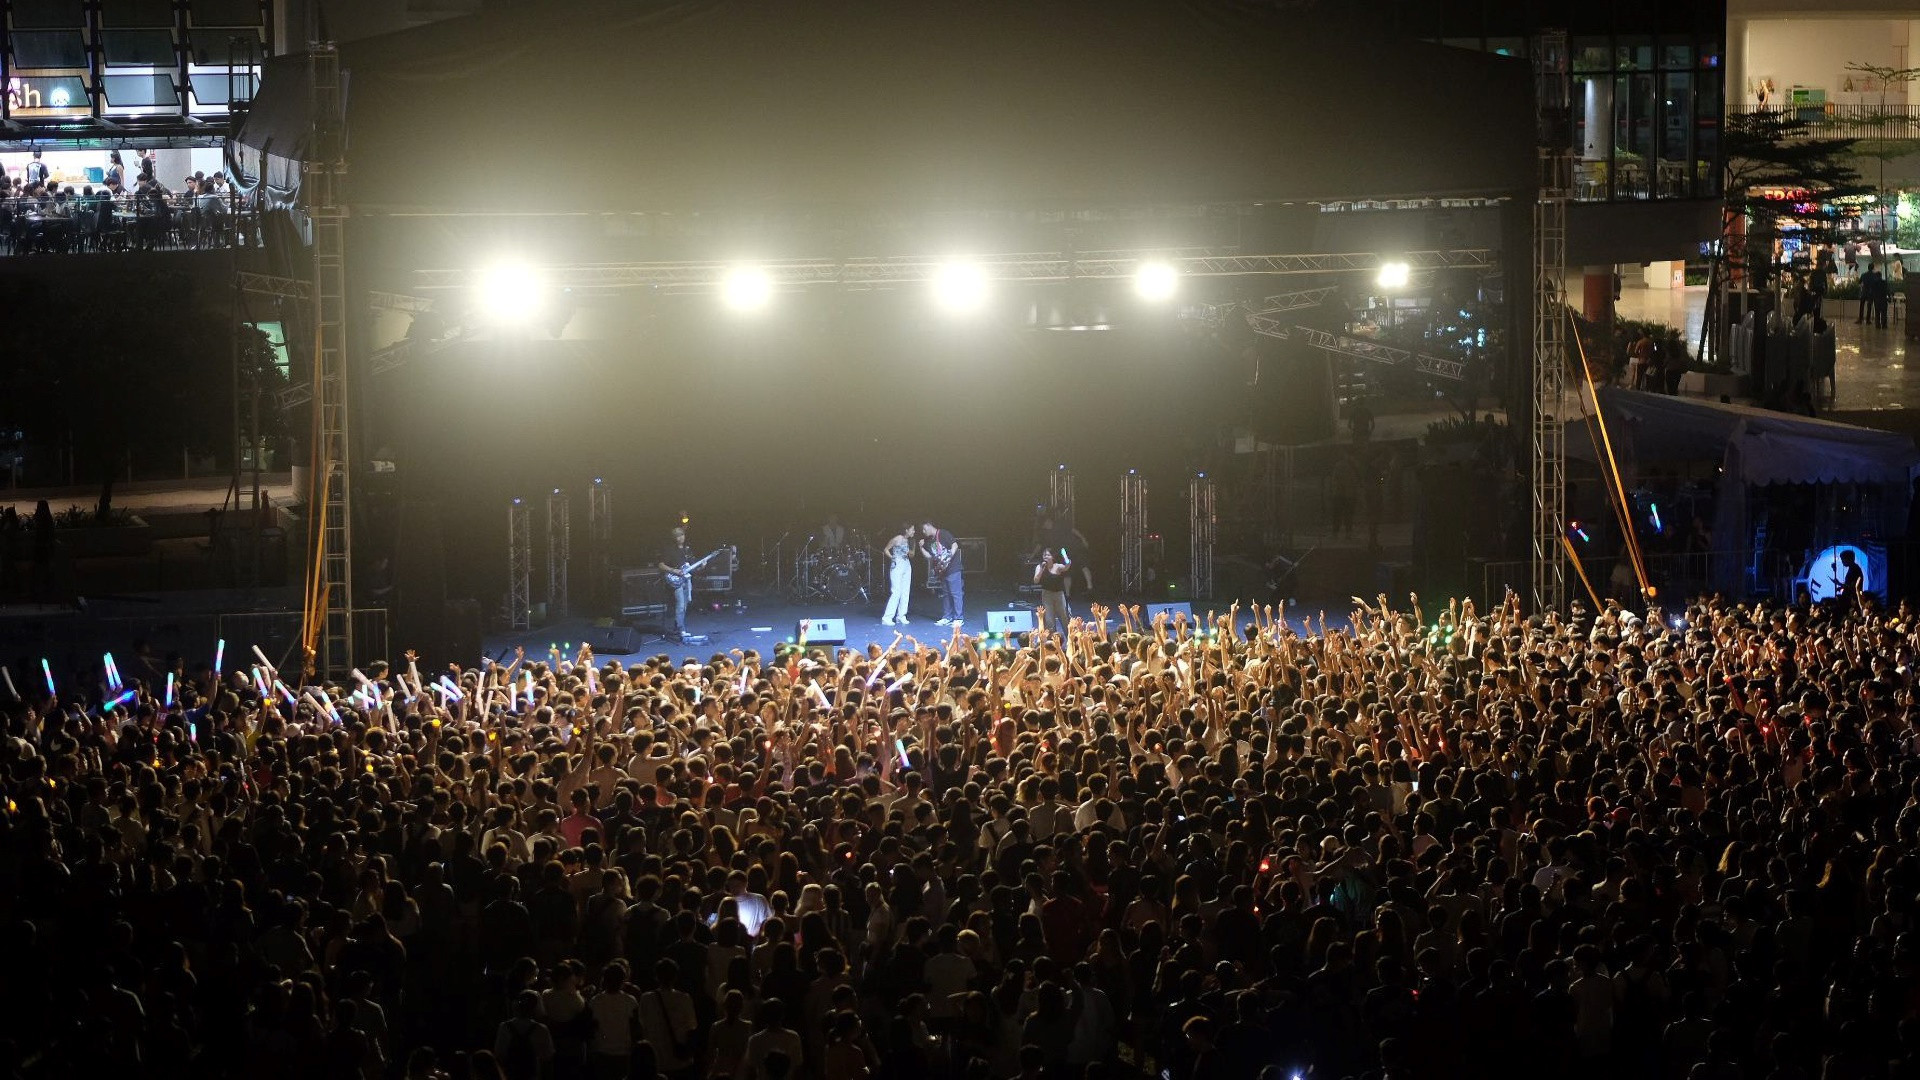 Over 5,000 attendees vibed out to the six-hour-long setlist of performances across various genres.
